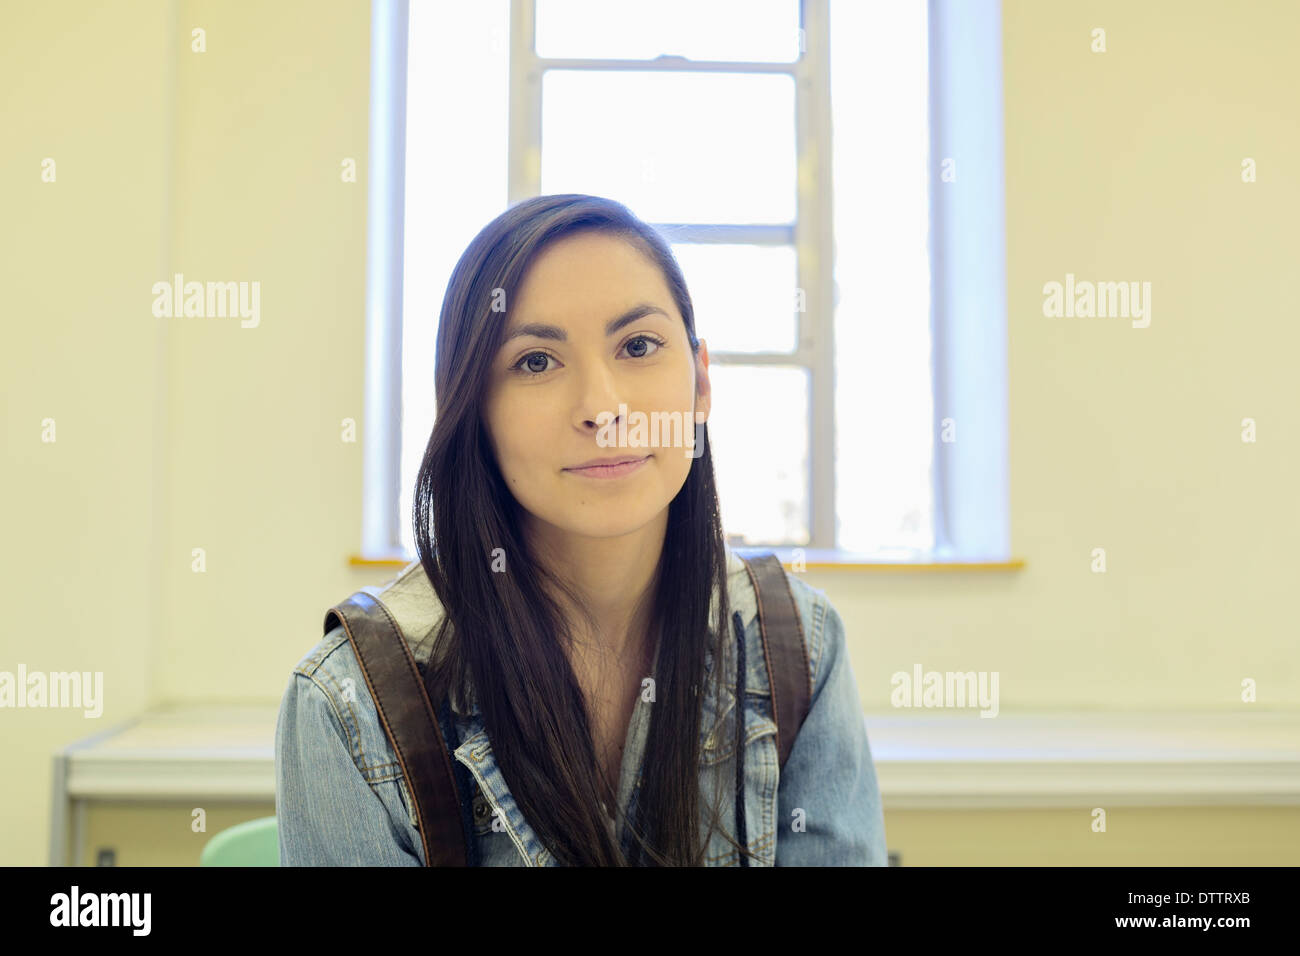 Middle Eastern student sitting in classroom Stock Photo